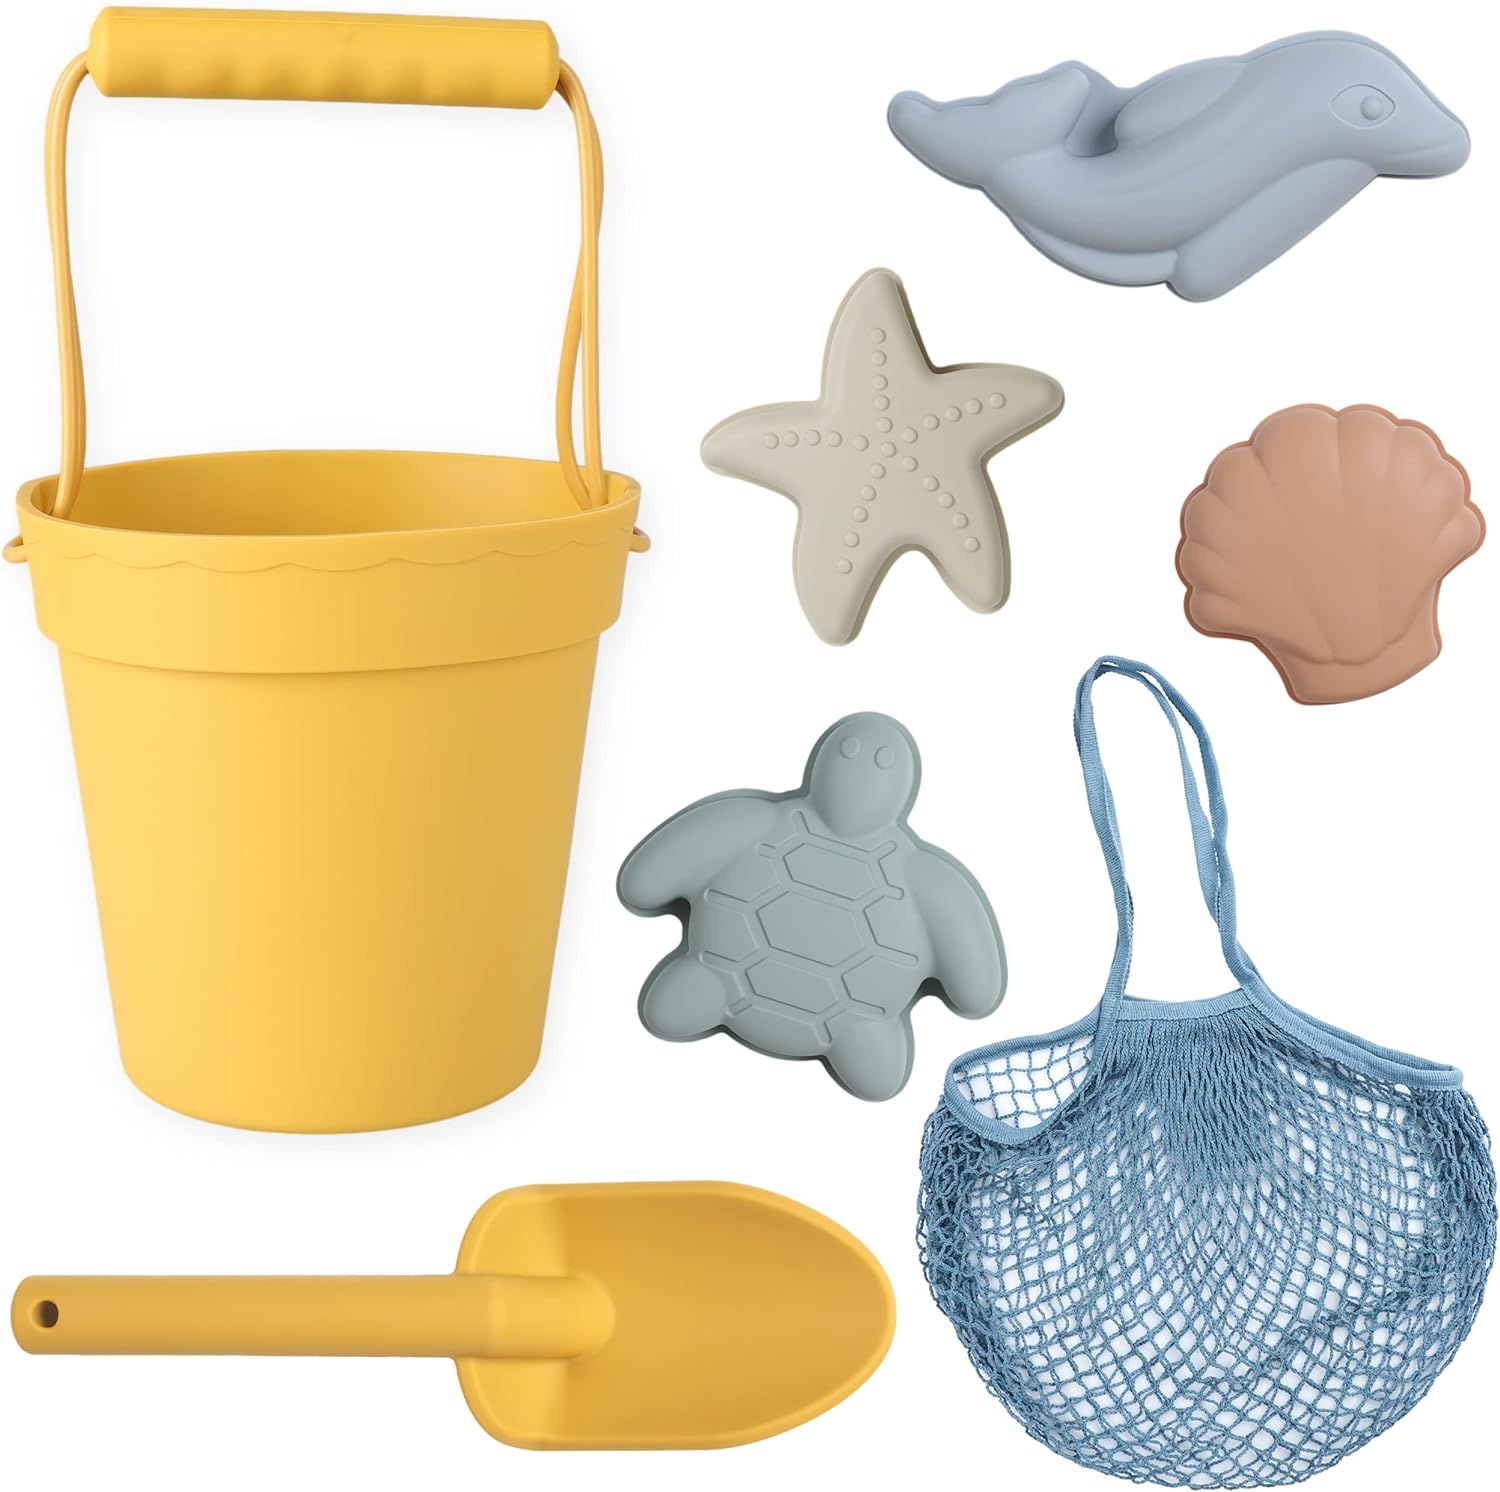 BLUE GINKGO Silicone Beach Toys - Beach Accessories for Kids - Travel Beach Bag, Sand Toy Molds, ... | Amazon (US)